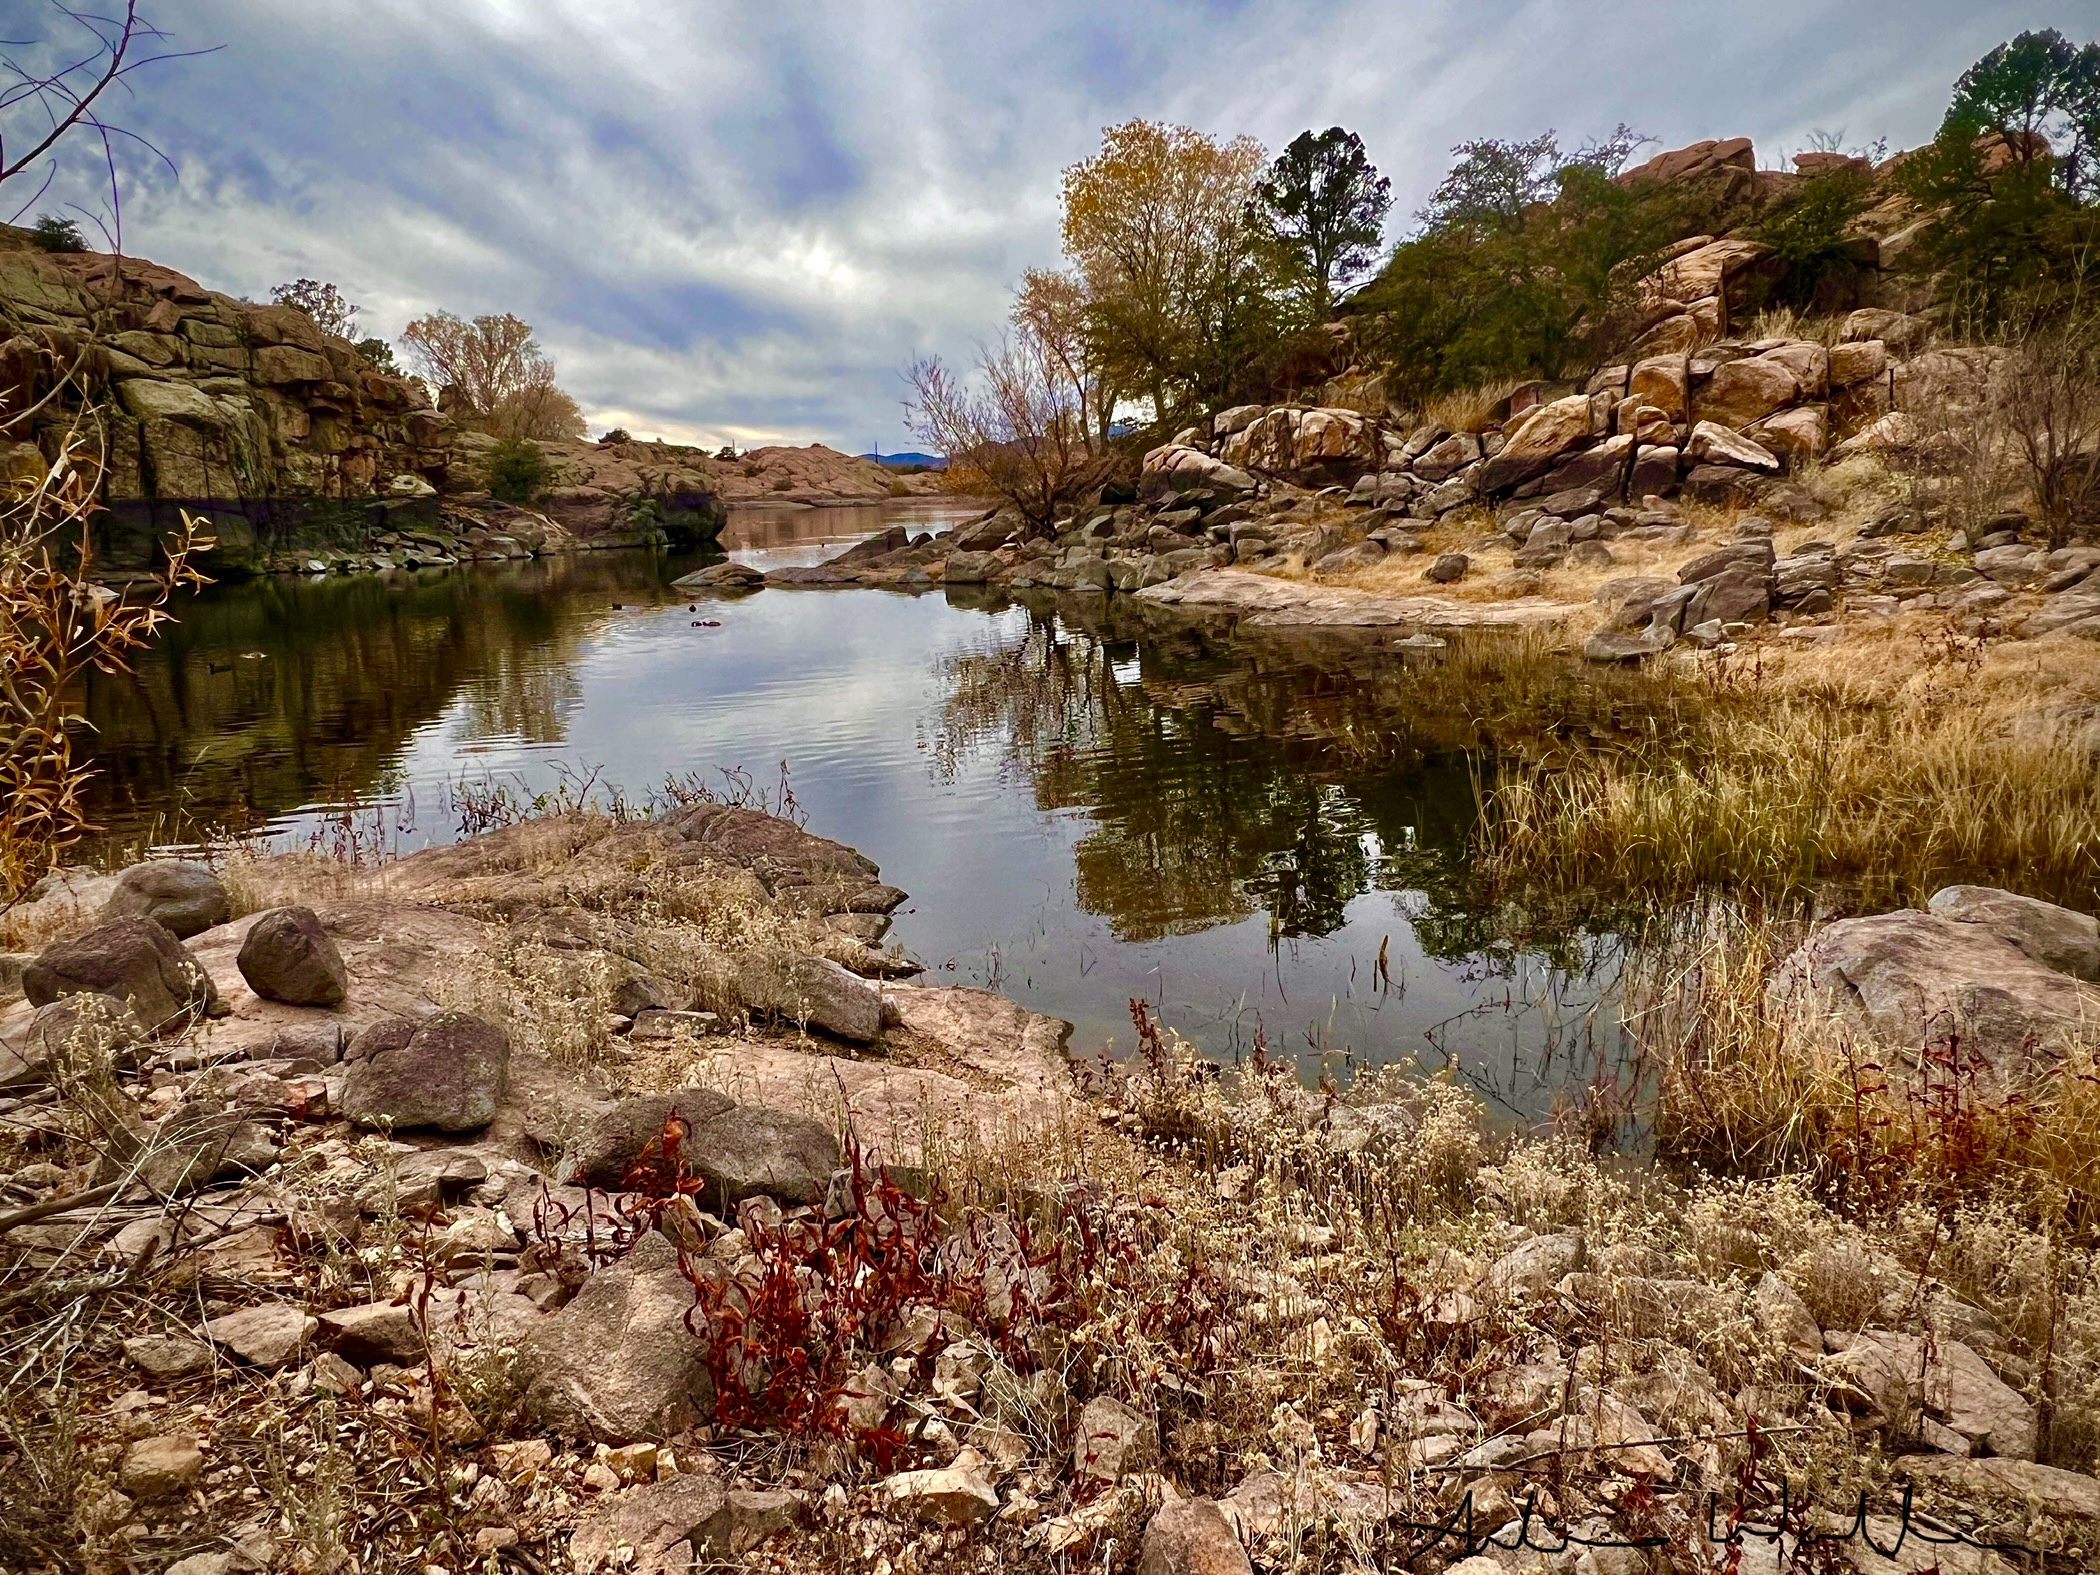 Photo by Arlene Waller  |  This image was created along the Willow Lake Trail in the Granite Dells area of Prescott.